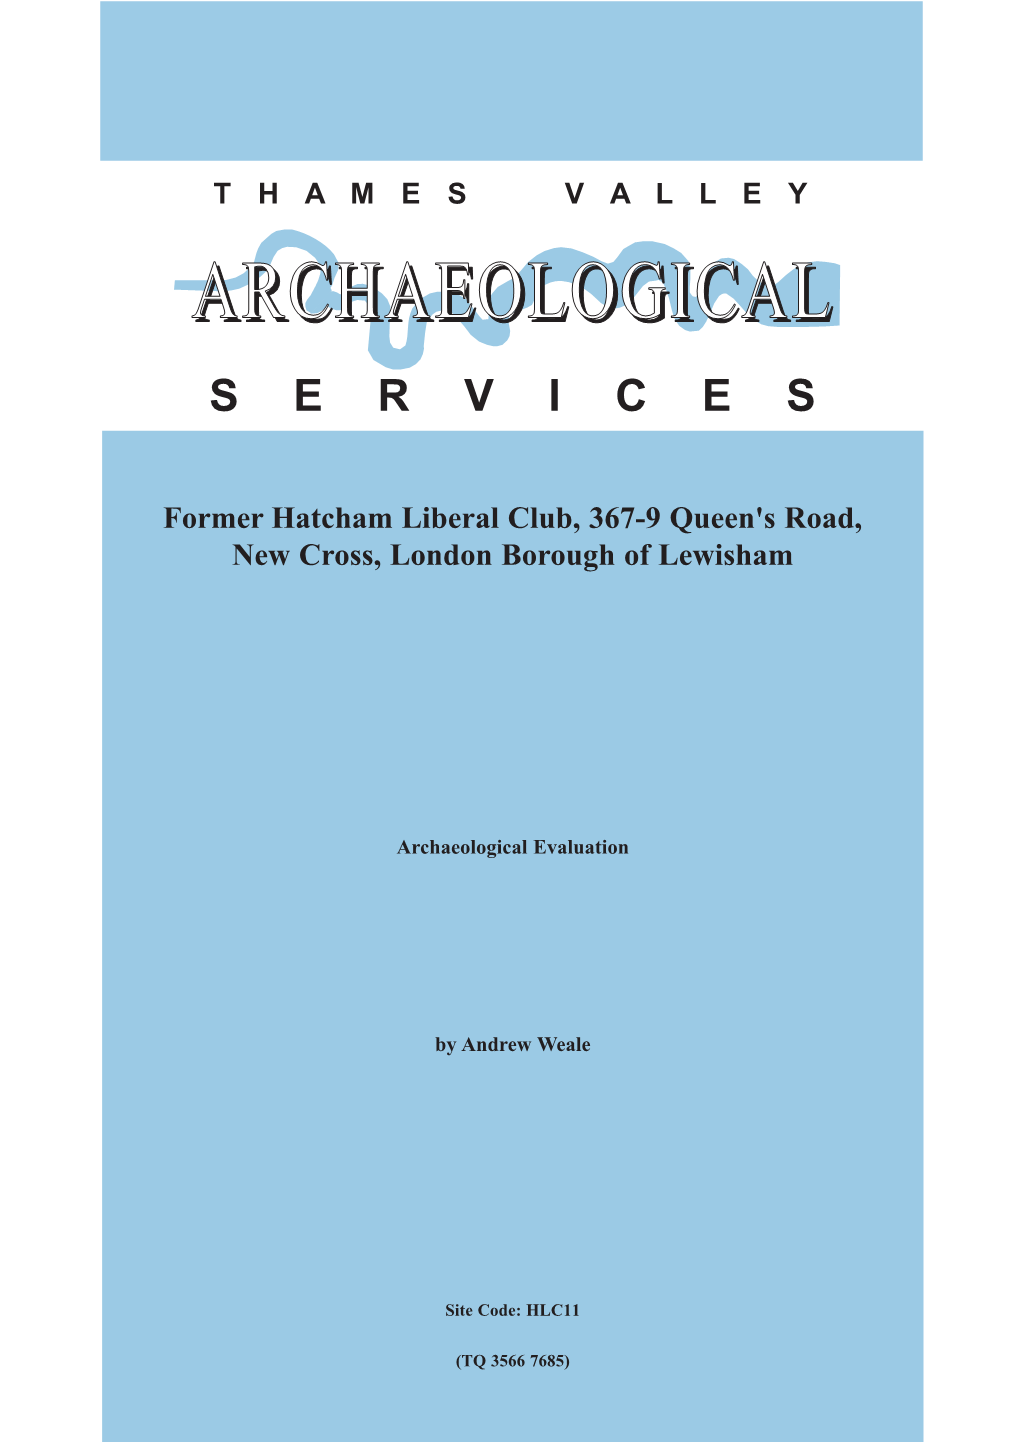 Thames Valley Archaeological Services